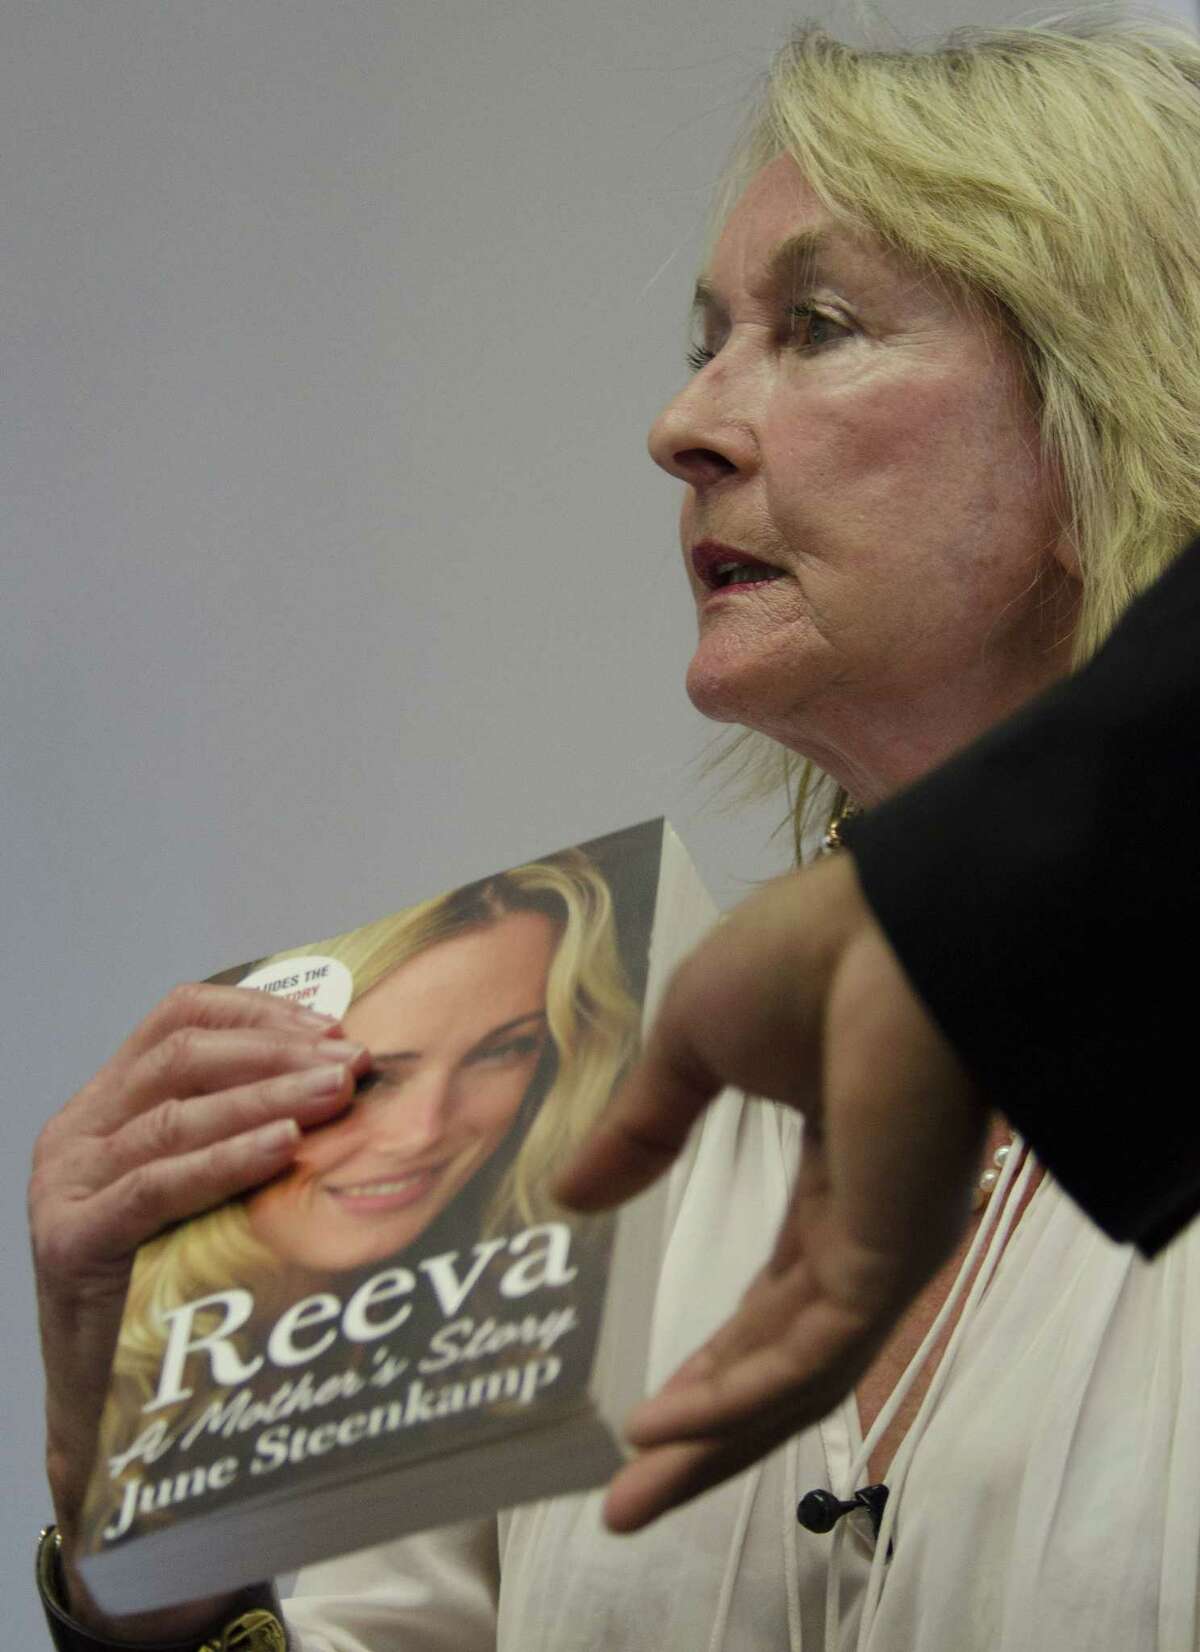 June Steenkamp, the mother of the late Reeva Steenkamp who was shot dead by her boyfriend Oscar Pistorius in 2013, speaks at the launch of her book, ëReeva, A Mothers Story.í in Johannesburg Tuesday, March 10, 2015. Steenkamp said that she did not care about an upcoming appeal hearing by the star athlete. Pistoriusí lawyers will challenge a judge's decision to allow prosecutors to appeal the runner's negligent killing conviction later this week. (AP Photo/Shiraaz Mohamed)